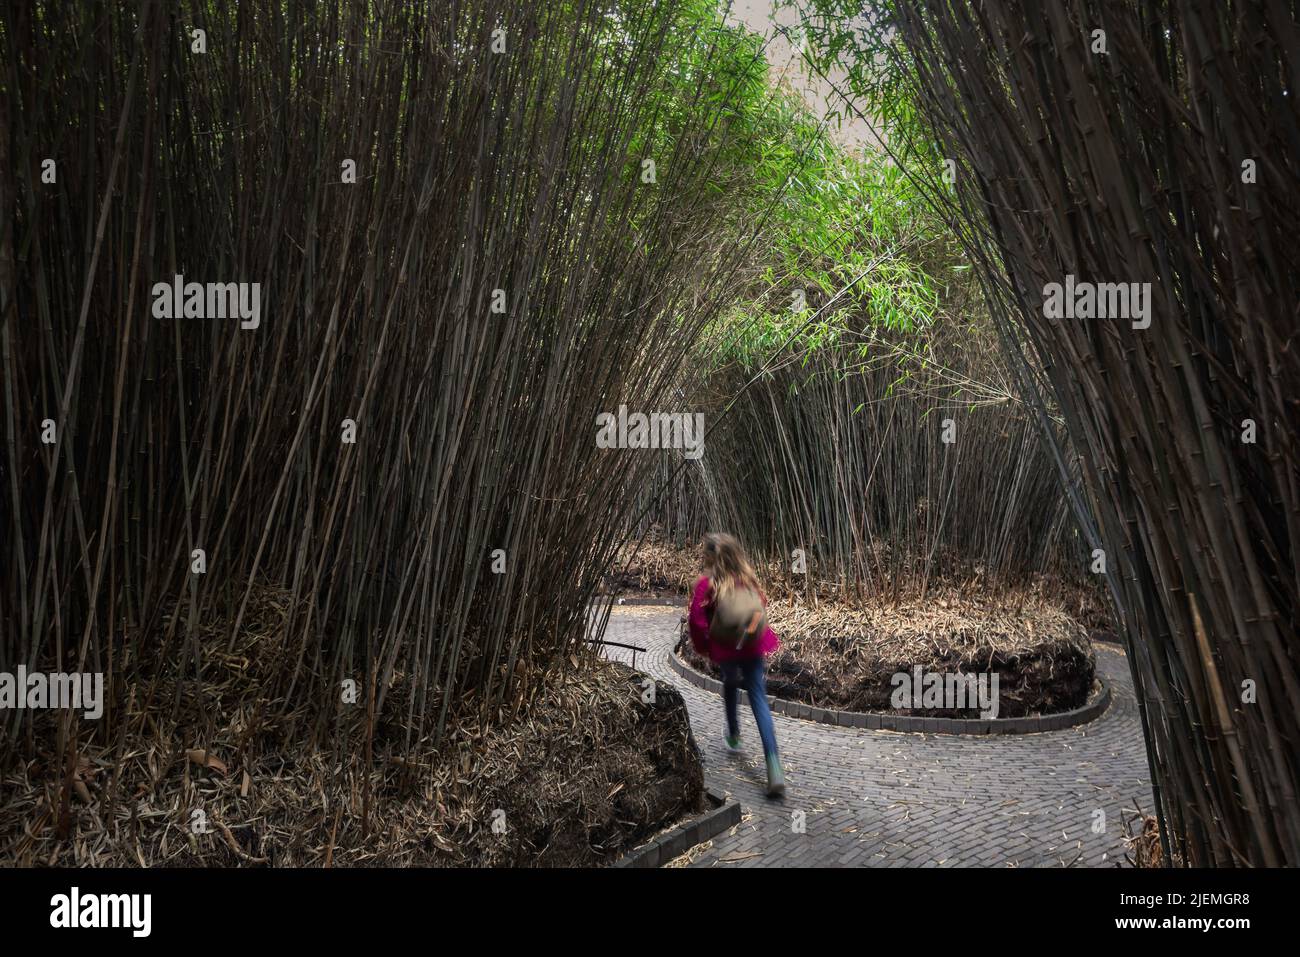 Child running away, rear view of a young girl running inside the Bamboo Labyrinth in Alnwick Garden, a popular attraction in the Northumberland, UK Stock Photo